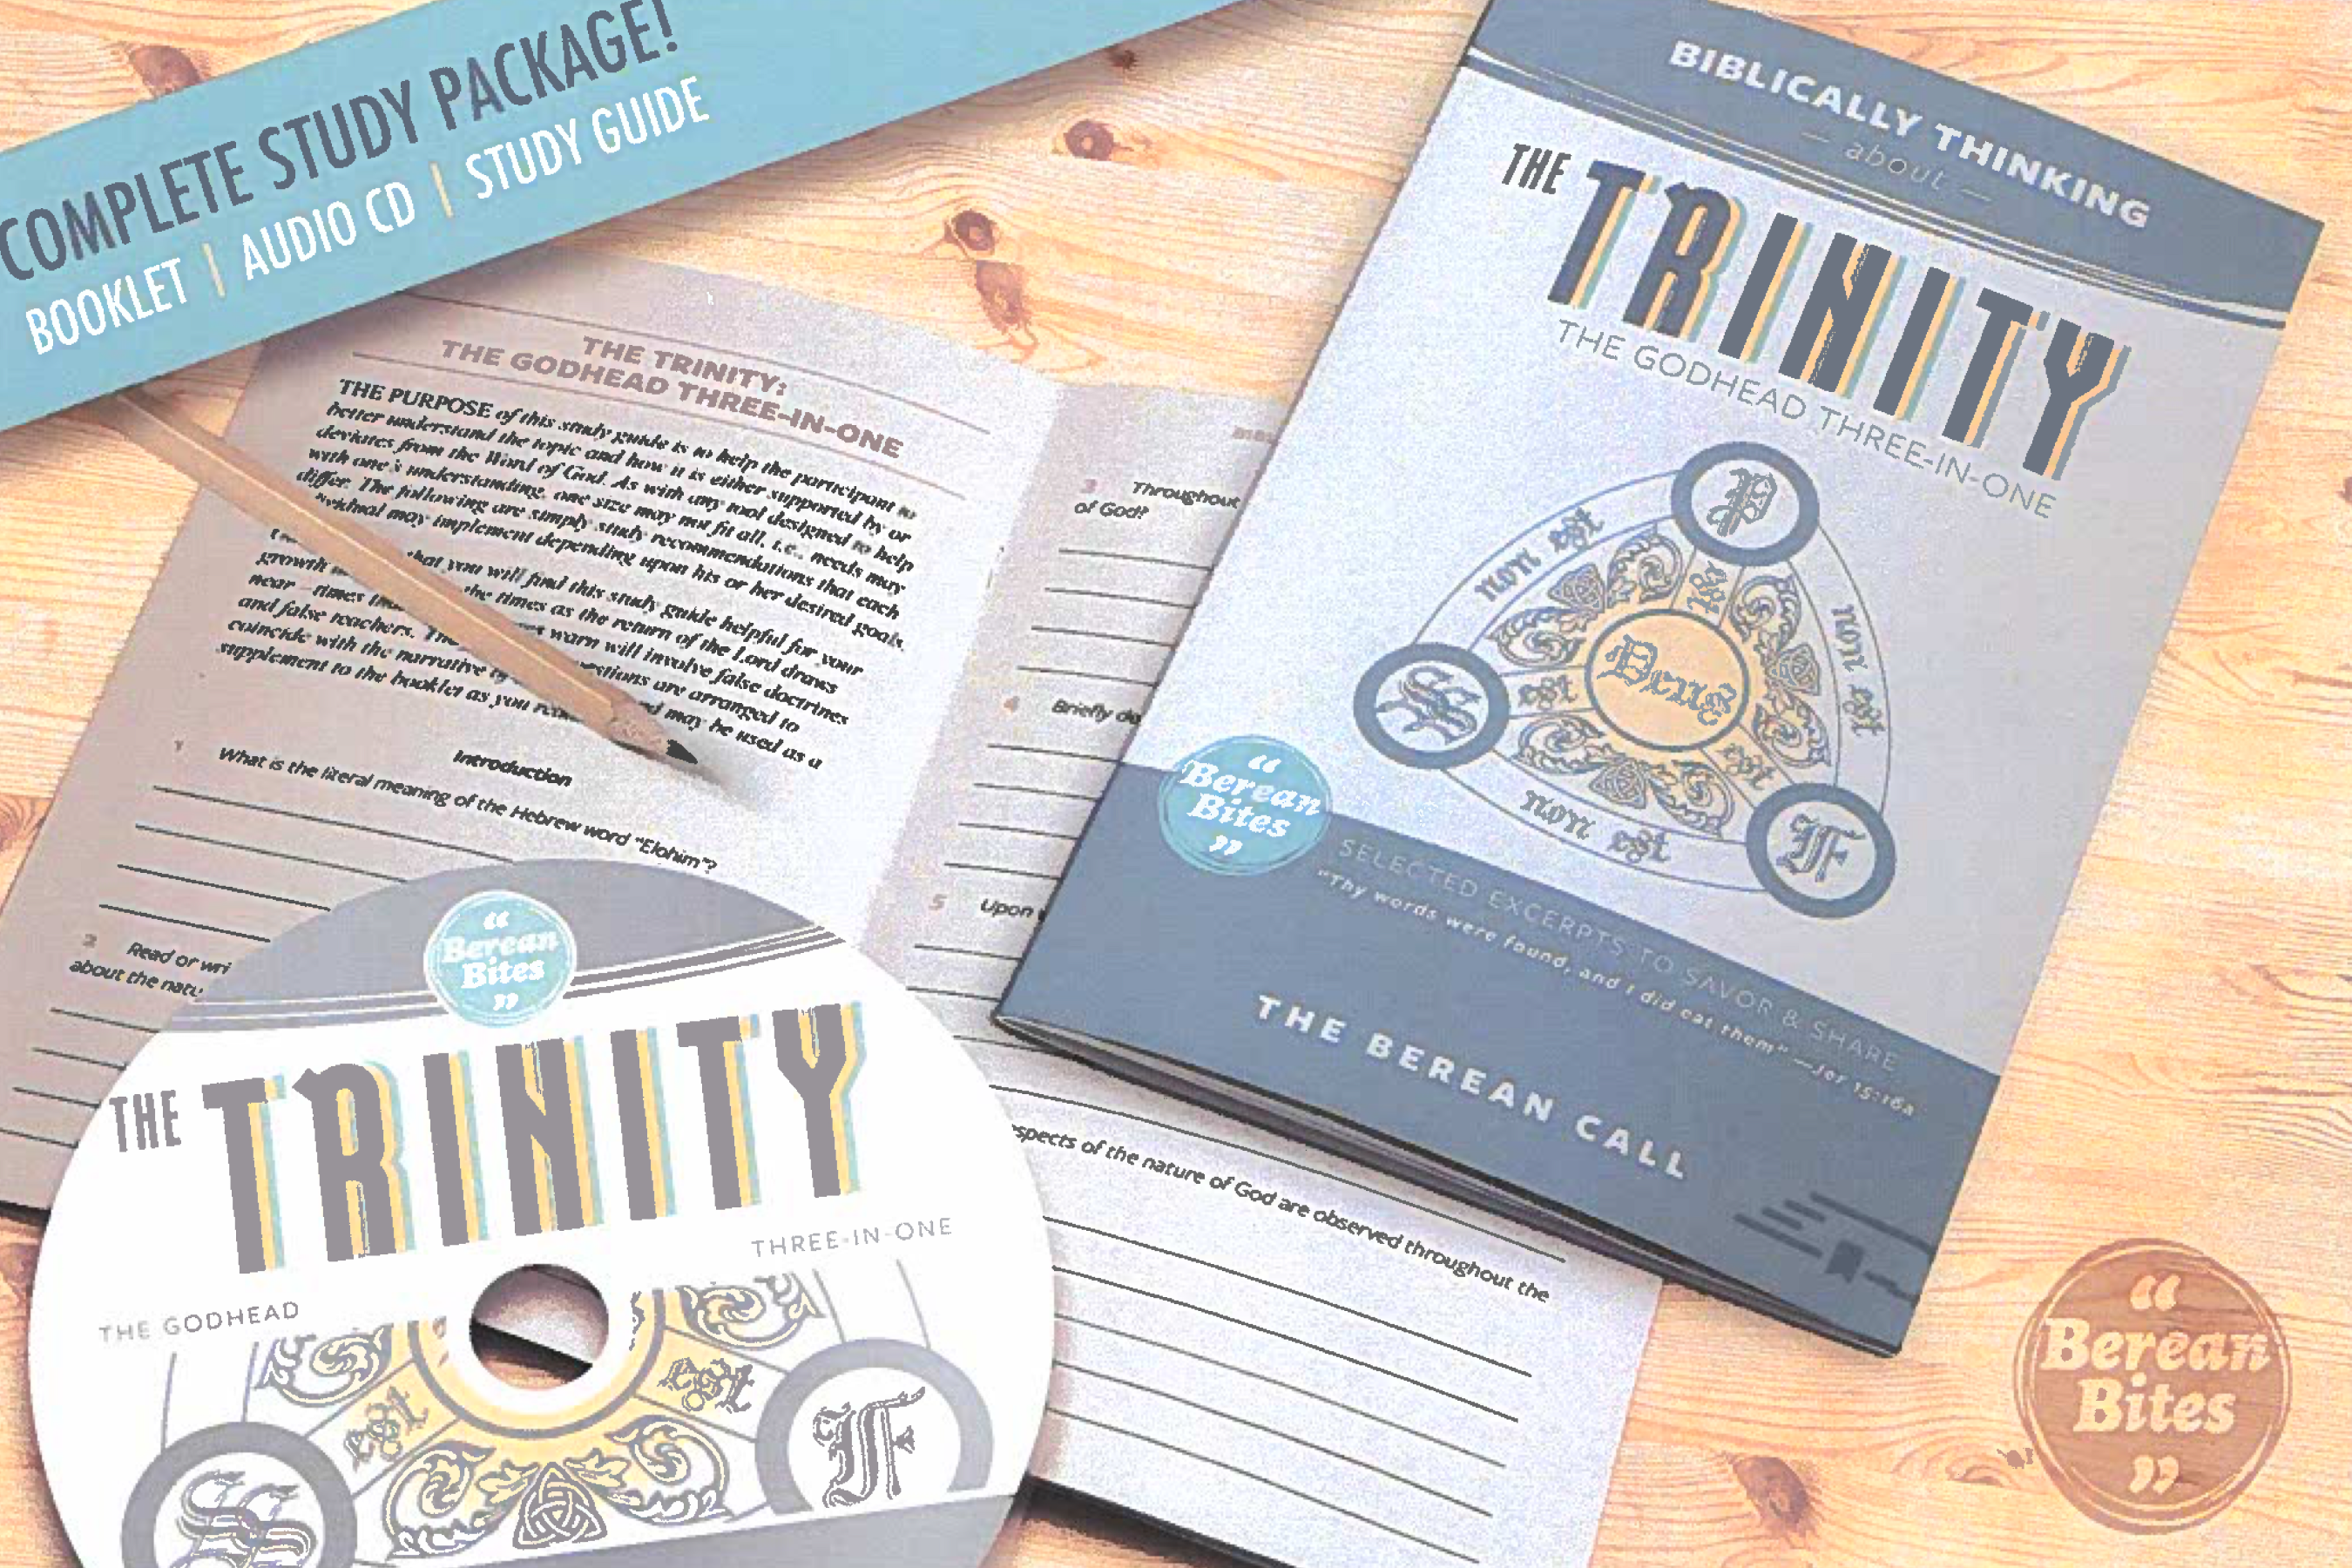 Biblically Thinking About The Trinity - Download